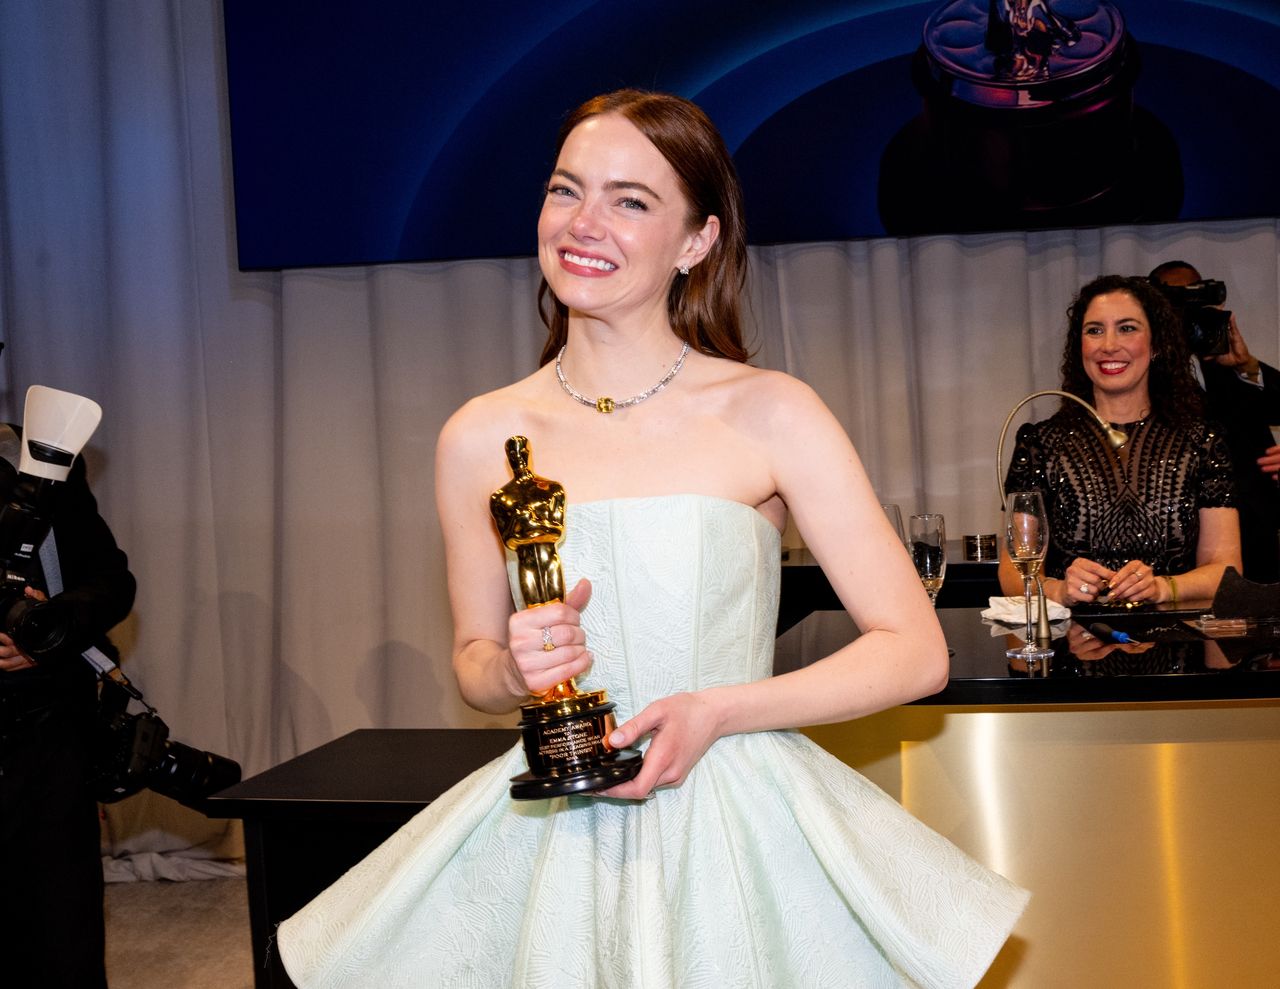 Emma Stone wins the Oscar for the best actress. And everyone loves her